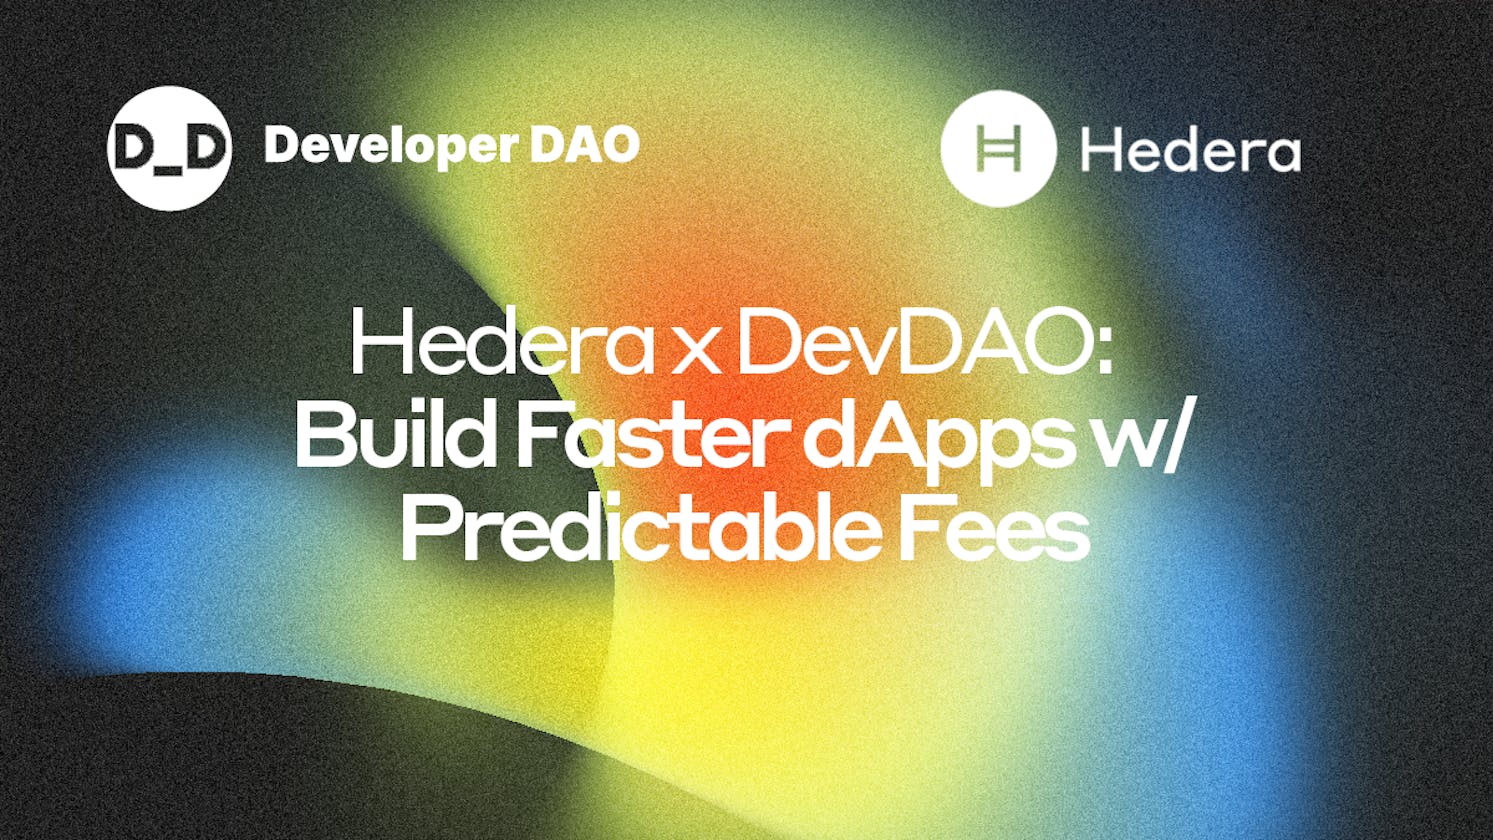 Hedera x DevDAO: Build Faster DApps with Predictable Fees